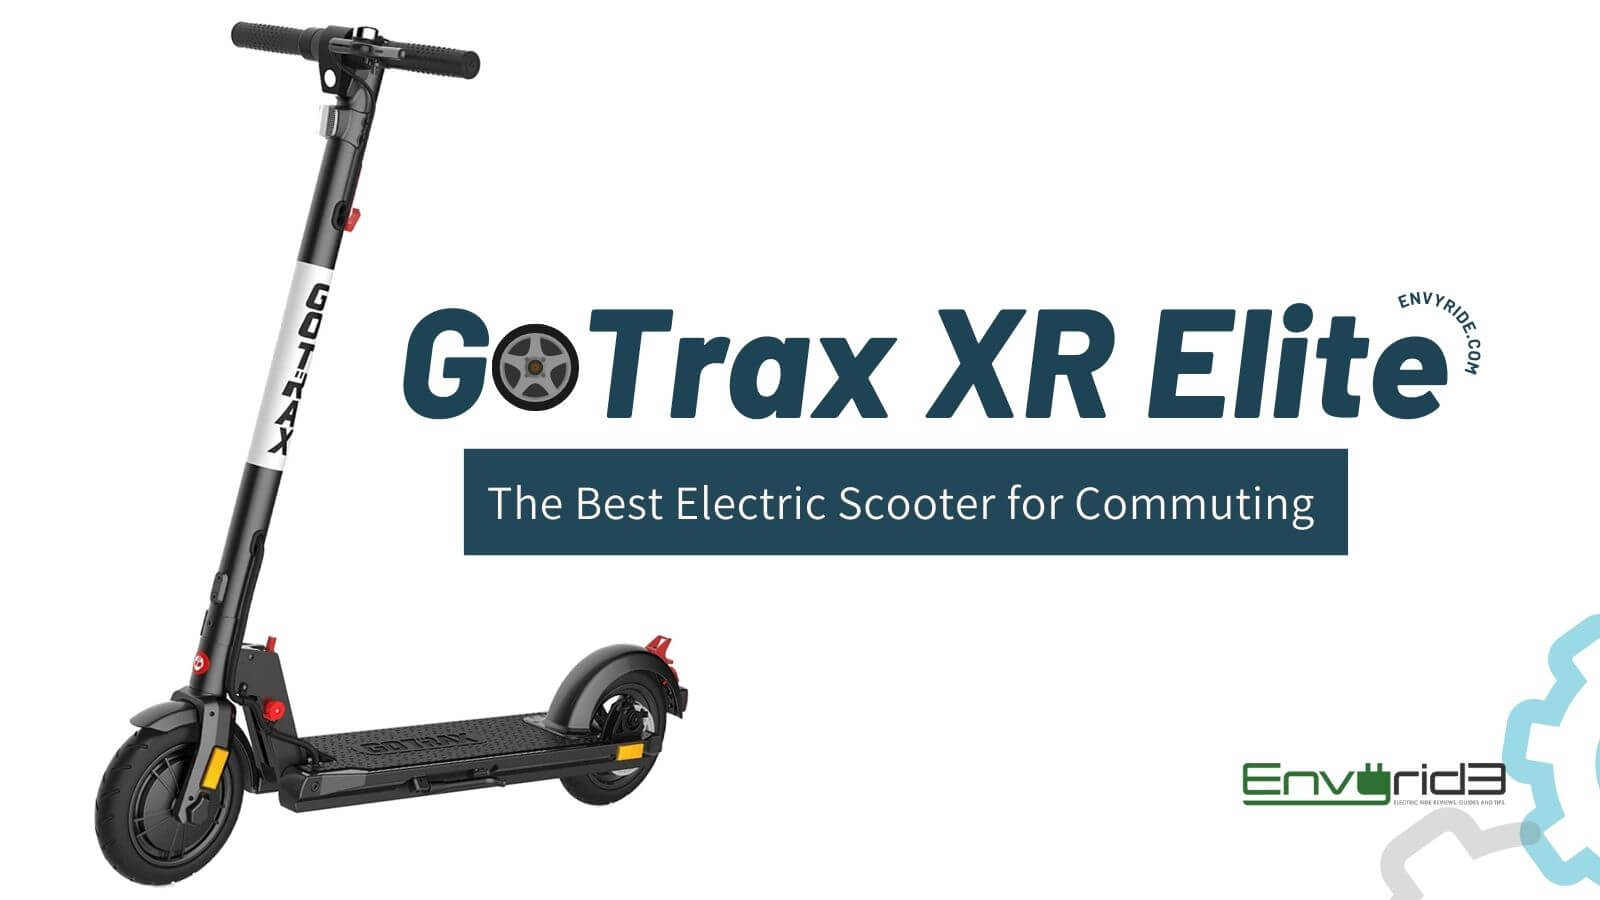 GoTrax XR Elite Review: The Best Electric Scooter for Commuting